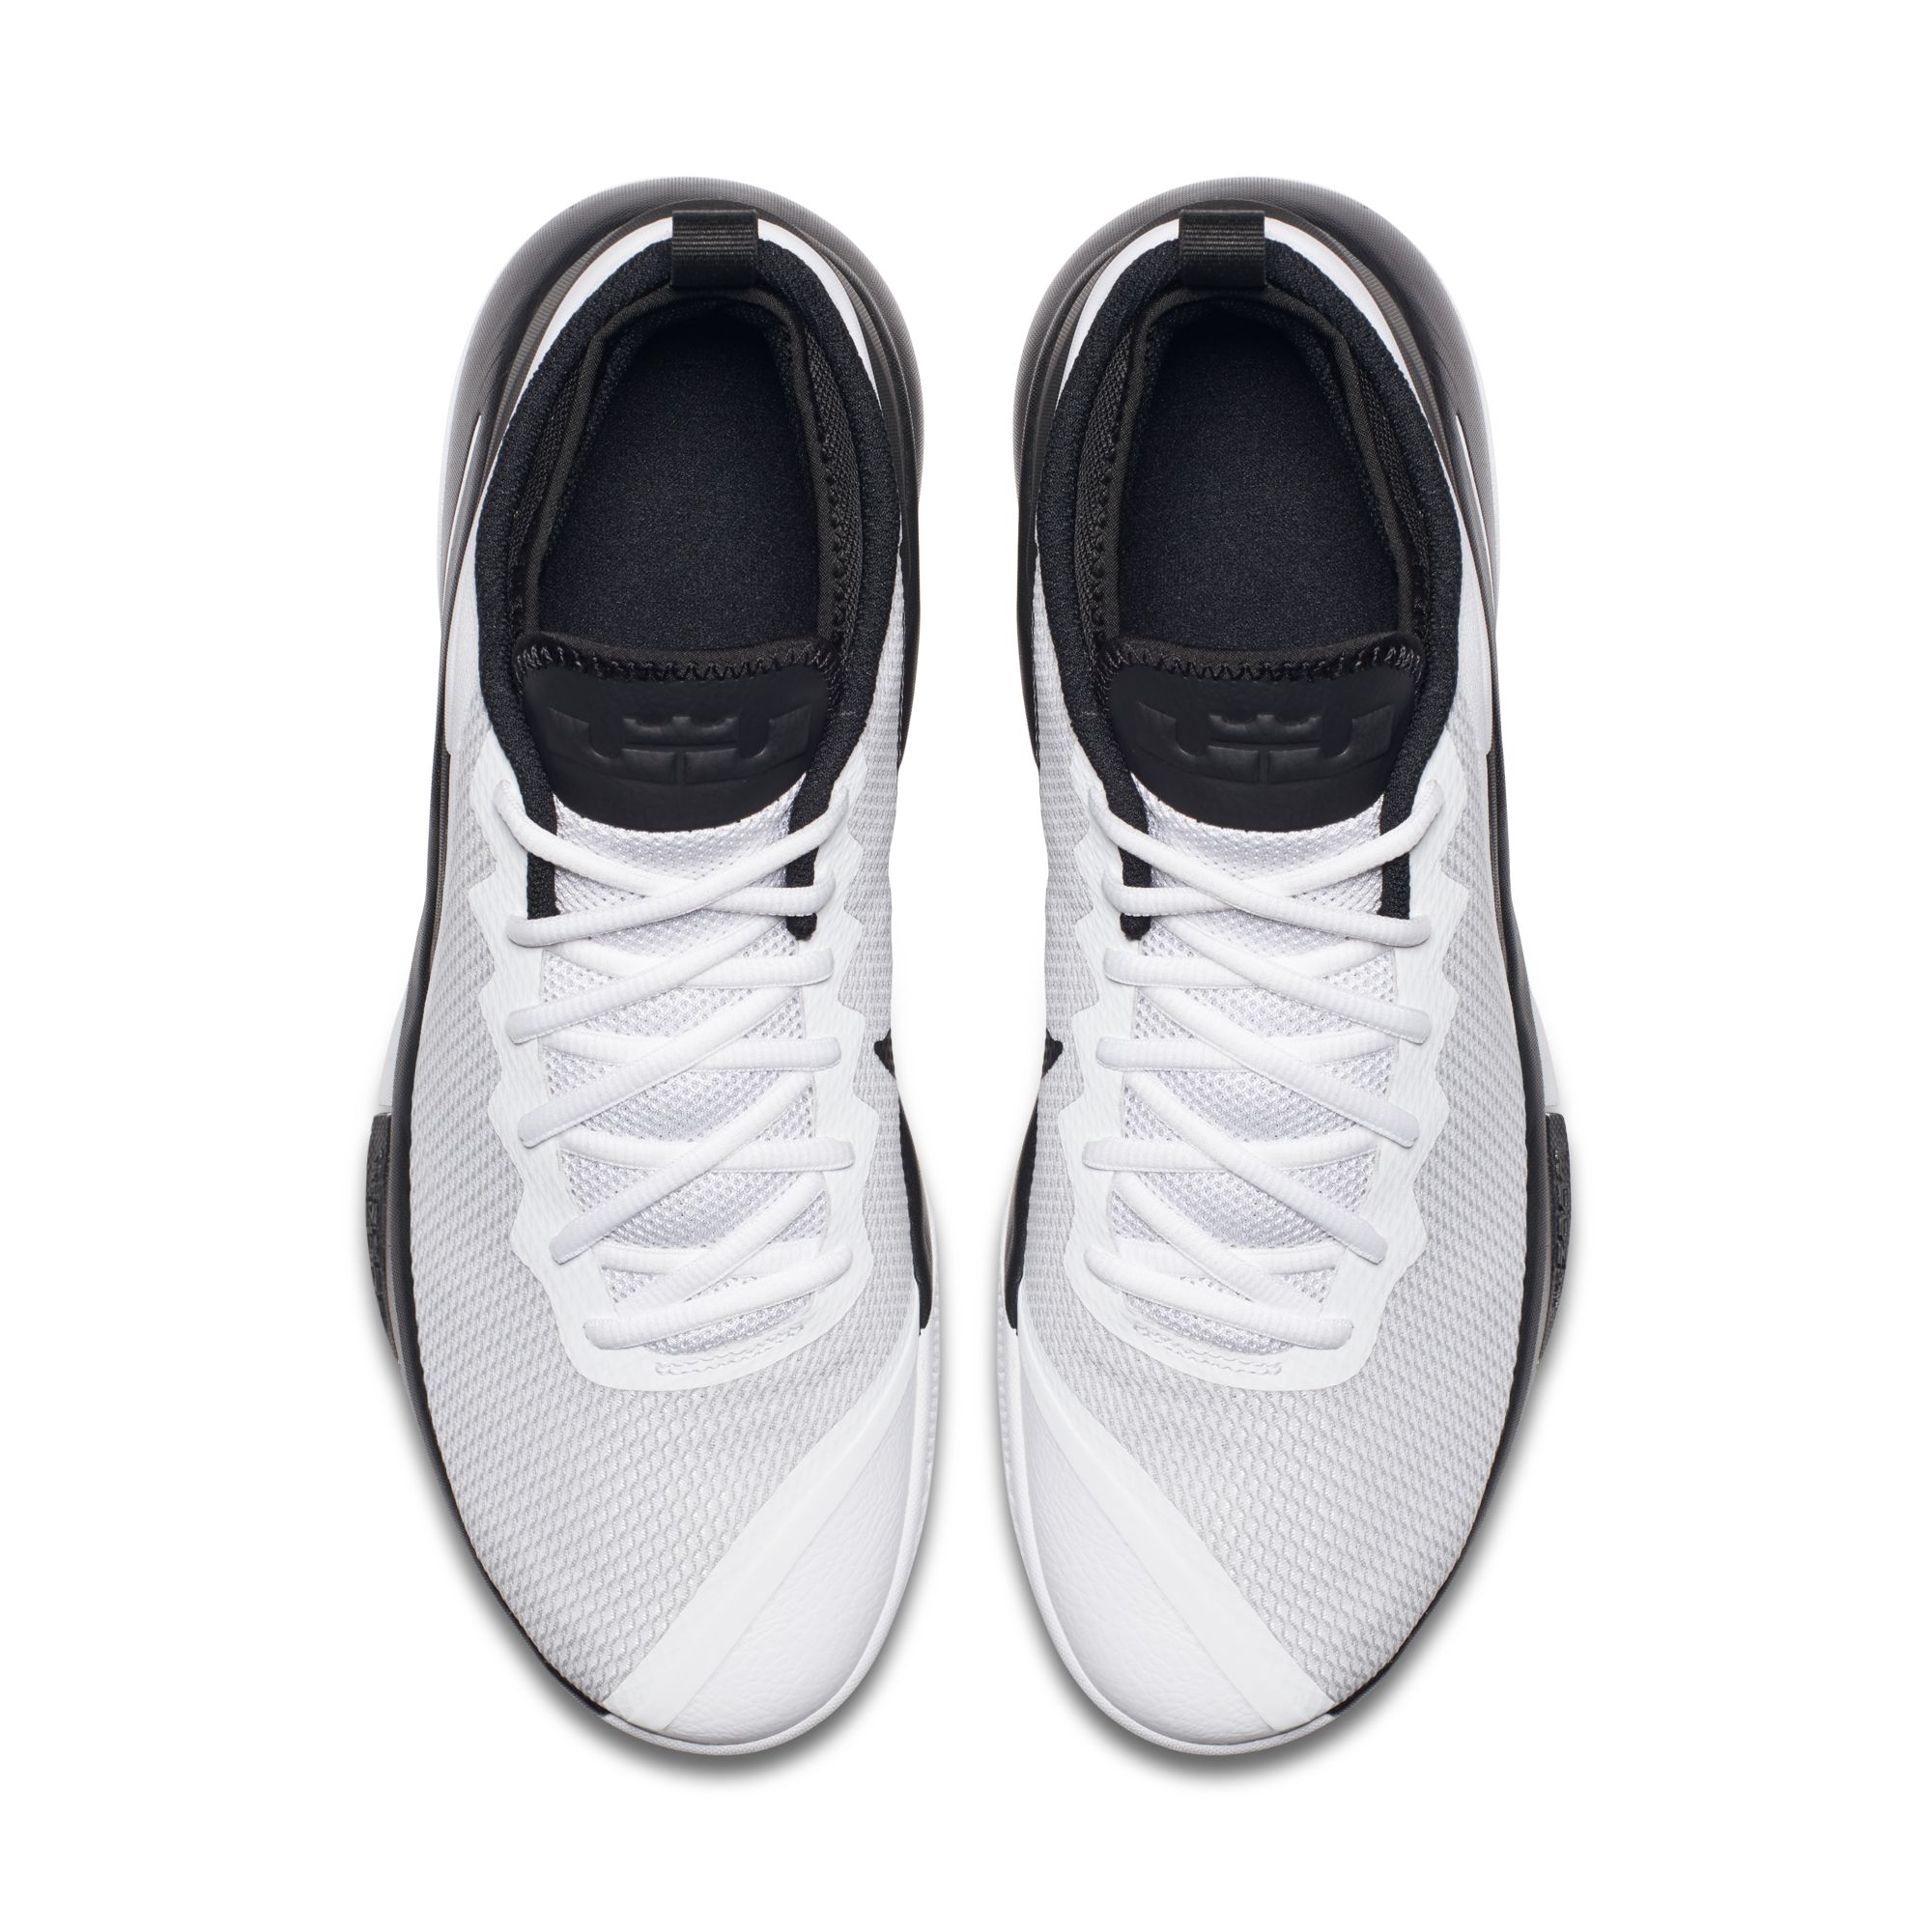 Reflexión Broma talento The Nike LeBron Witness 2 Has Arrived - WearTesters